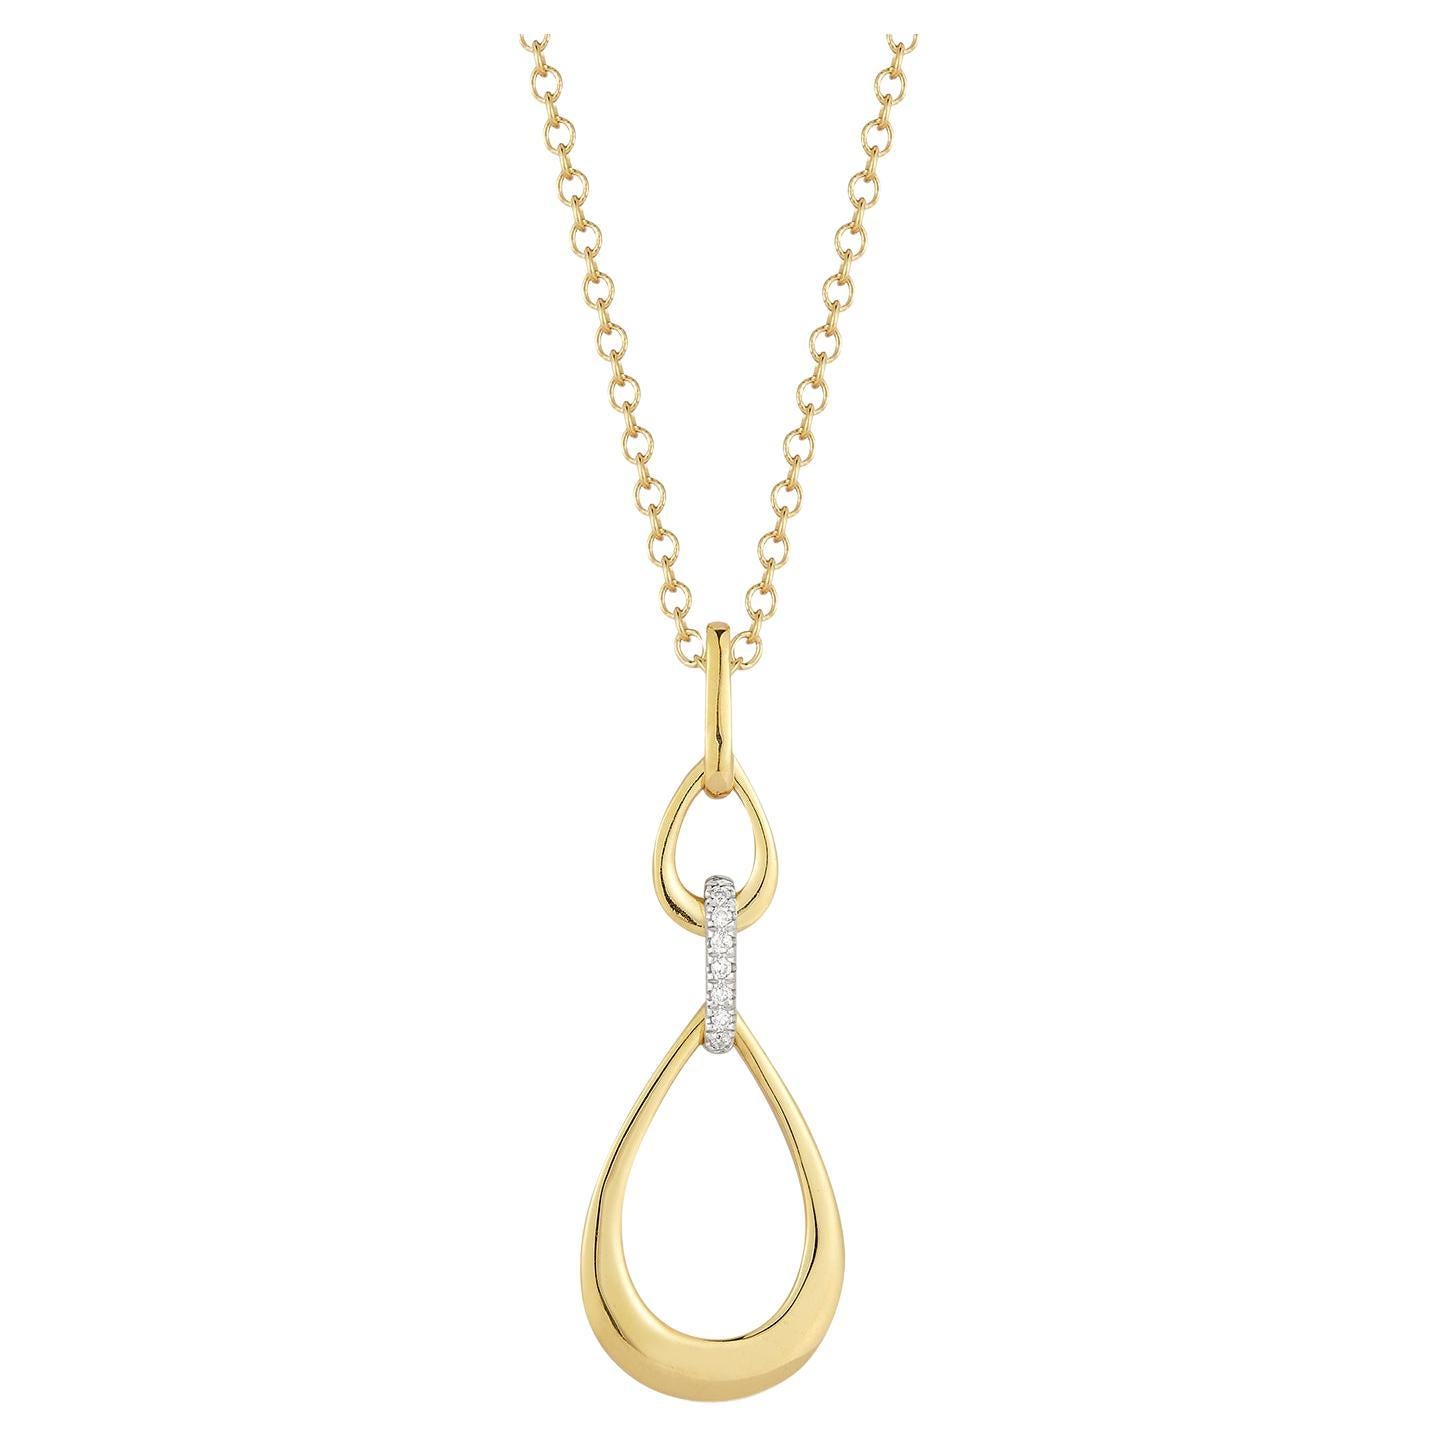 Hand-Crafted 14K Yellow Gold High Polish Graduating Tear-Drop Pendant For Sale